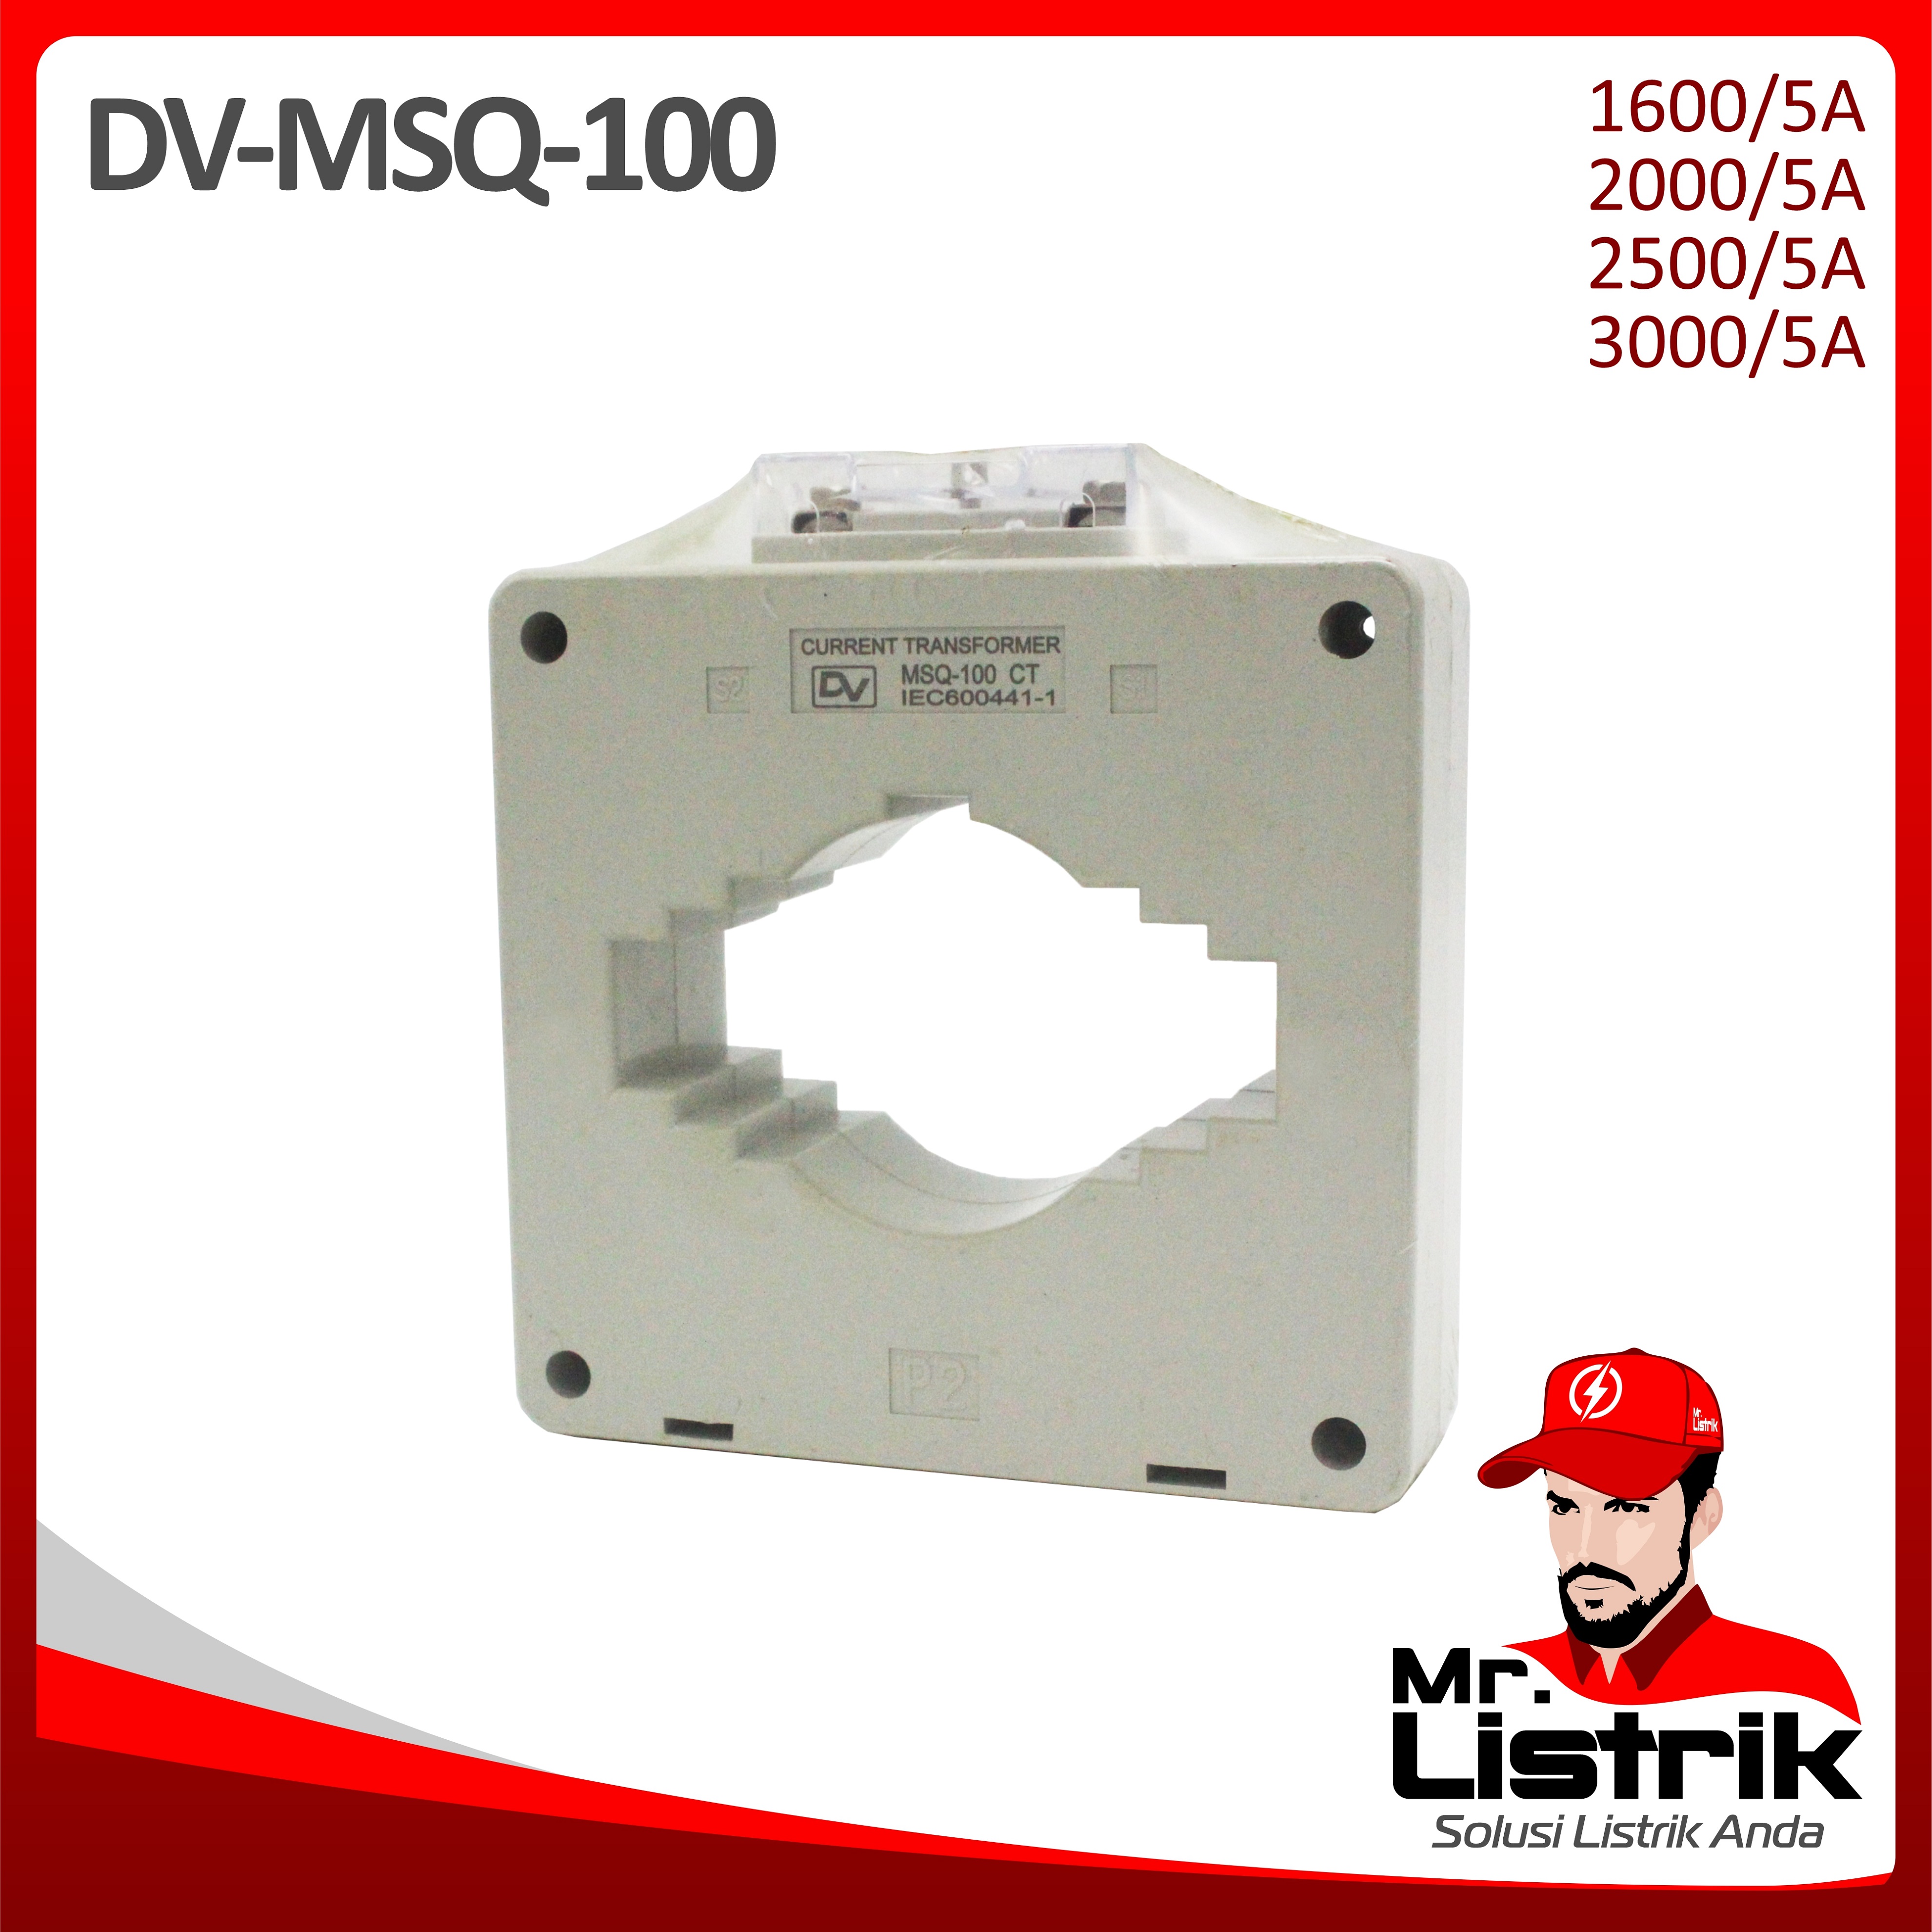 Current Transformer DV Fixed Type MSQ-100 3000/5A